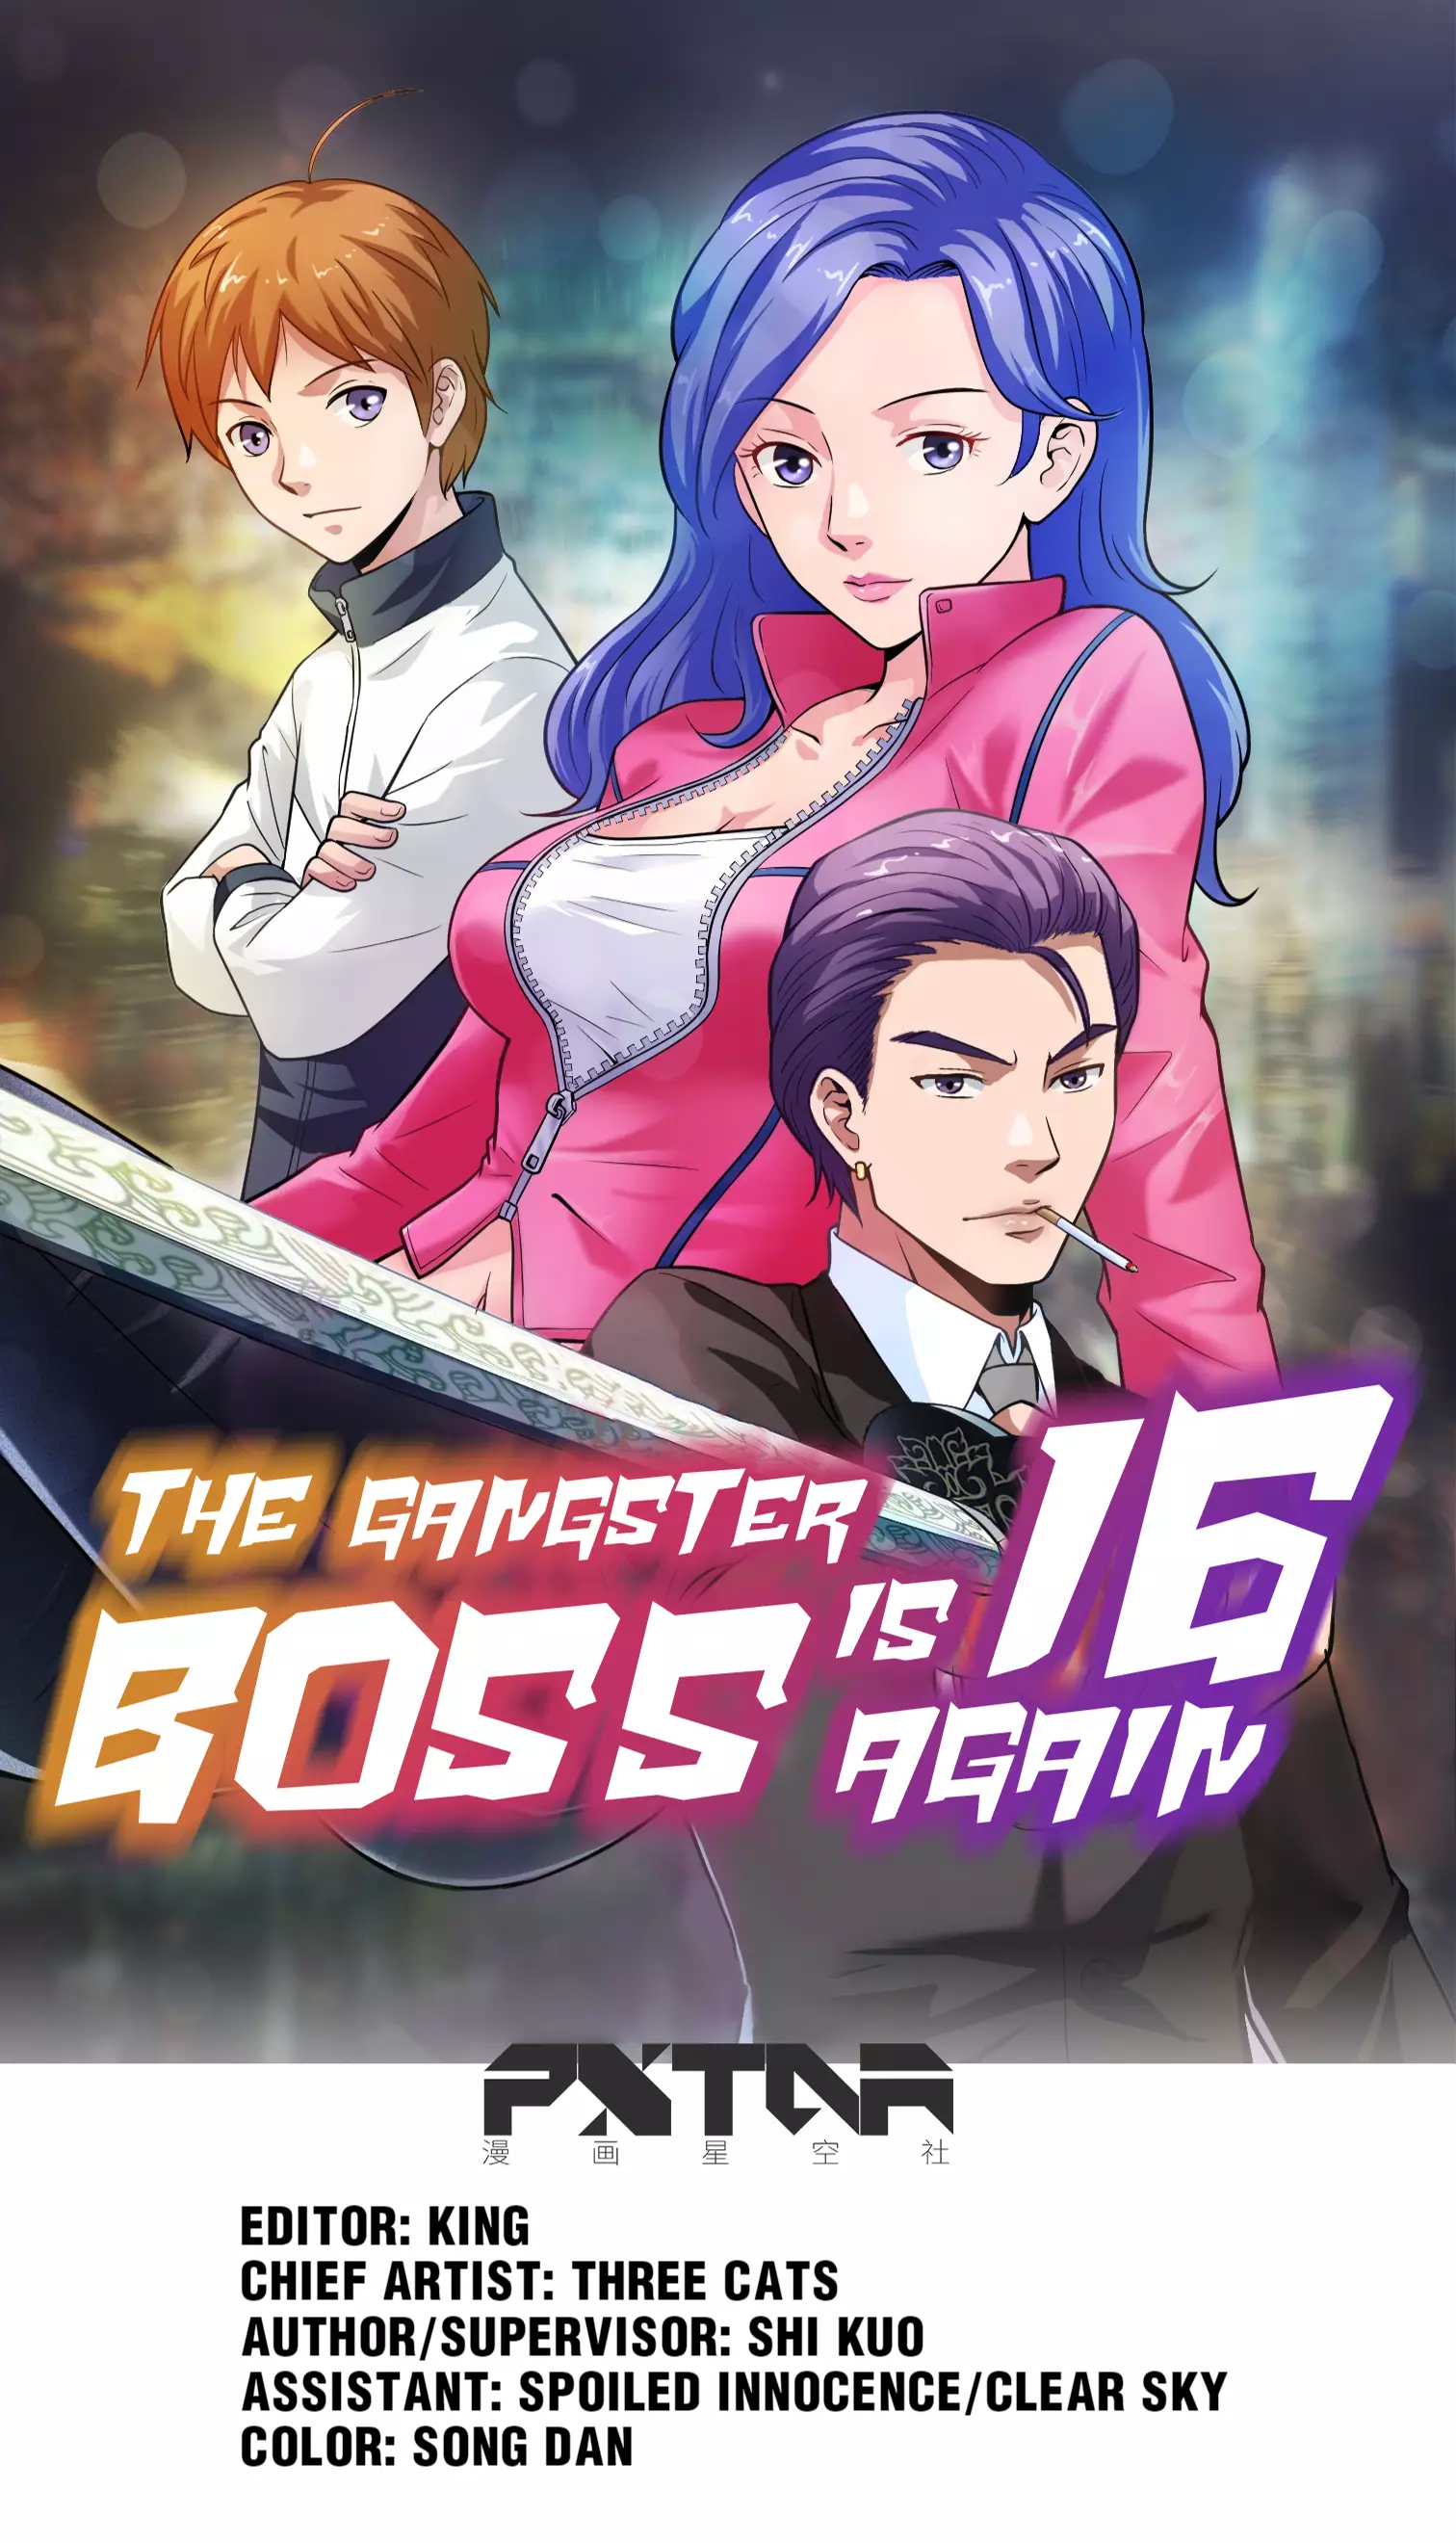 The Gangster Boss Is 16 Again - 3 page 1-73962edc